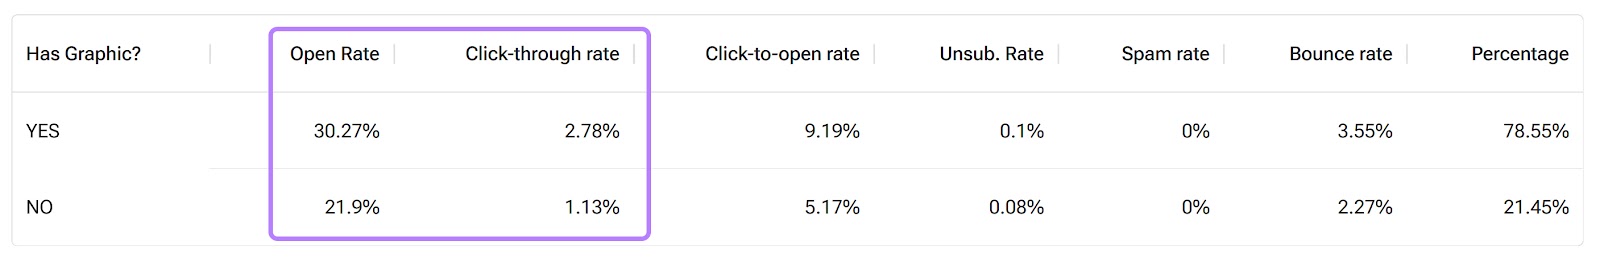 A data showing open and click-through rate for an email graphic